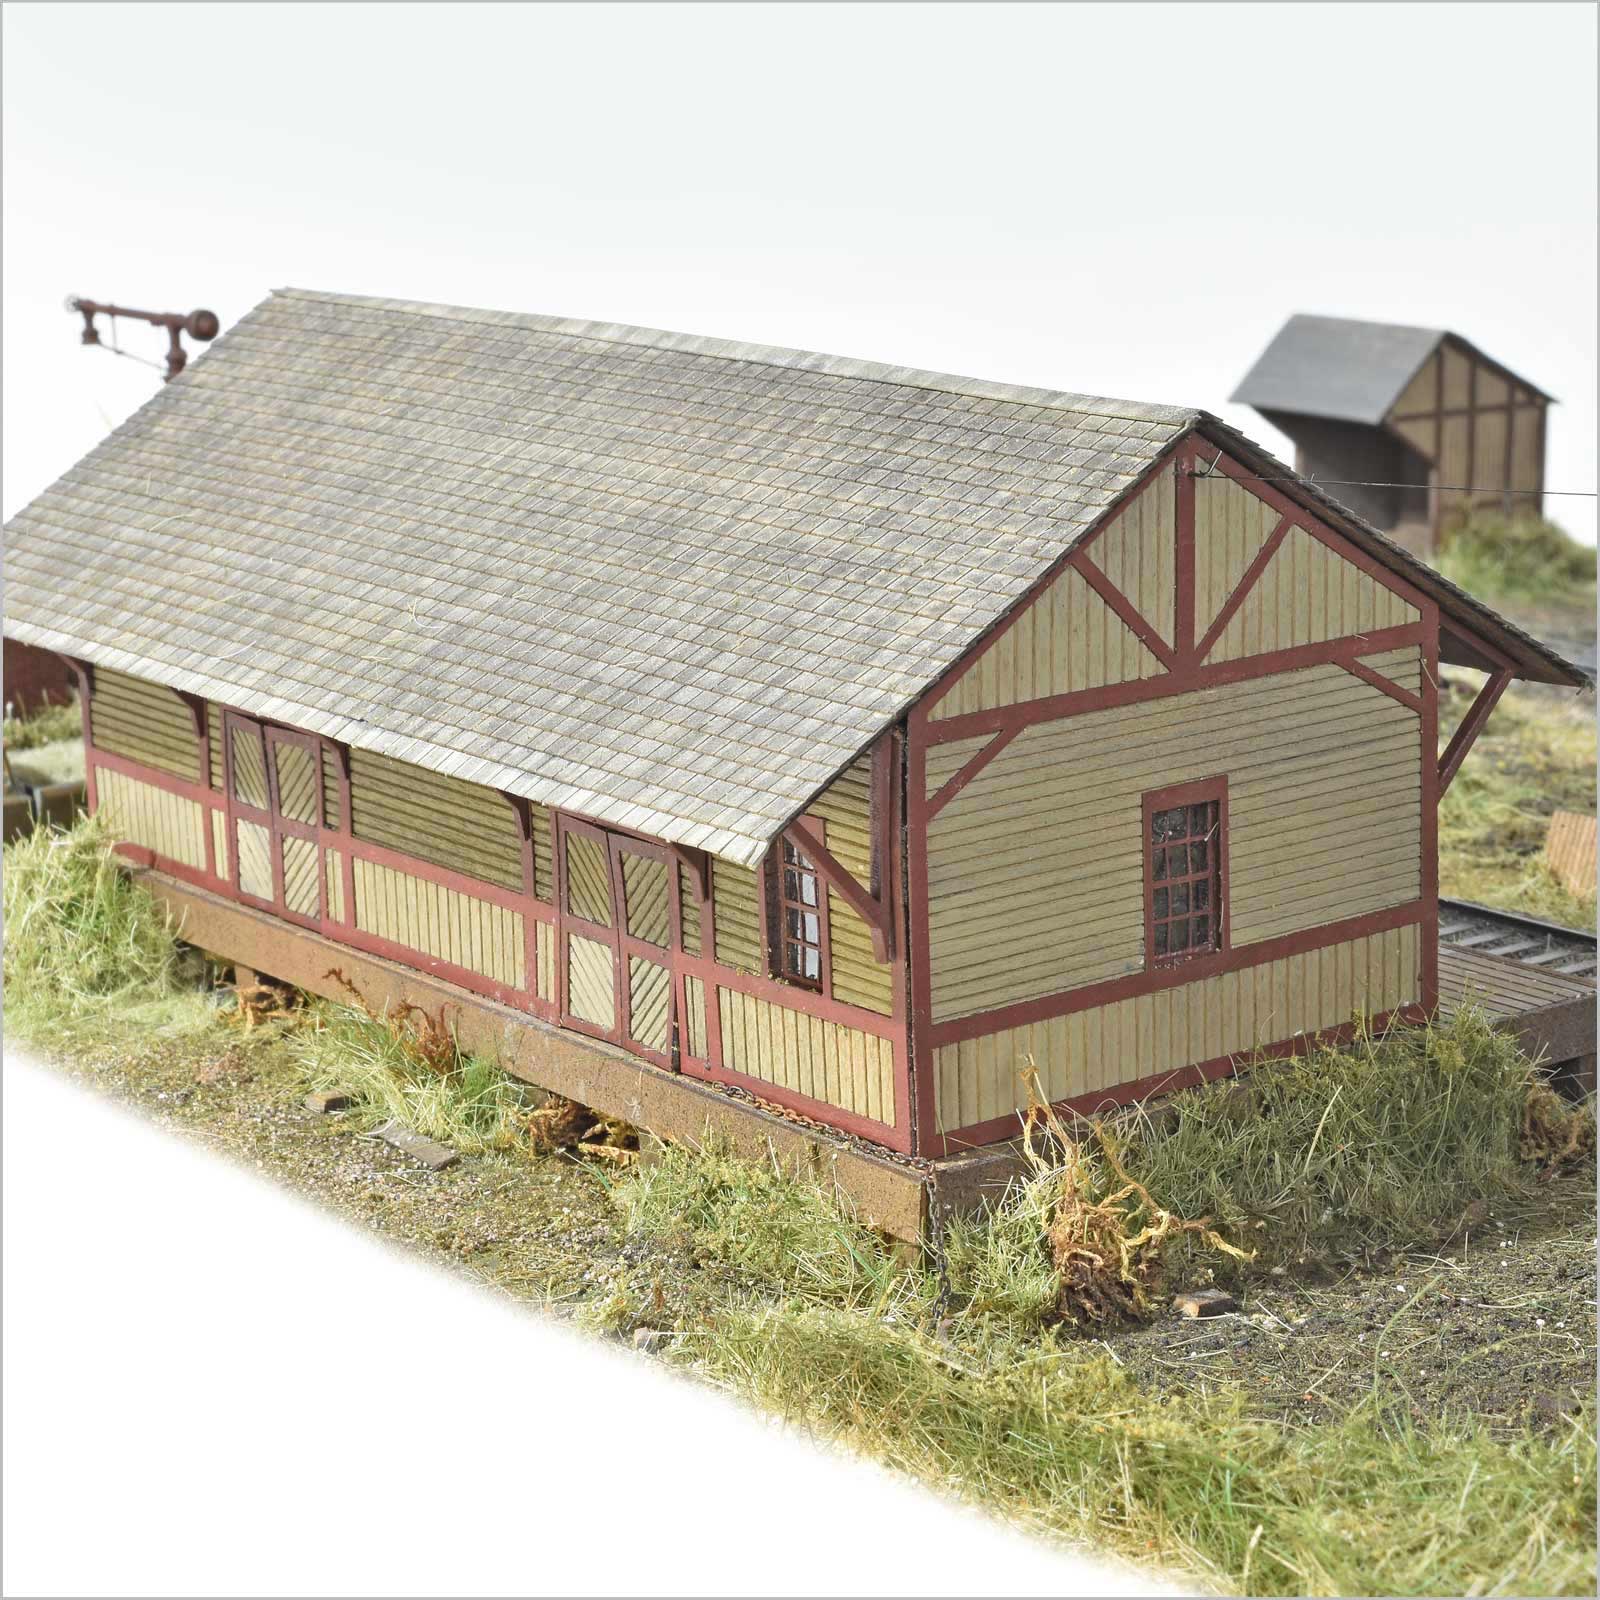 Standard Pennsylvania Railroad Freight Station, HO Scale, by Scientific - Micro - Mark Laser Model Kits